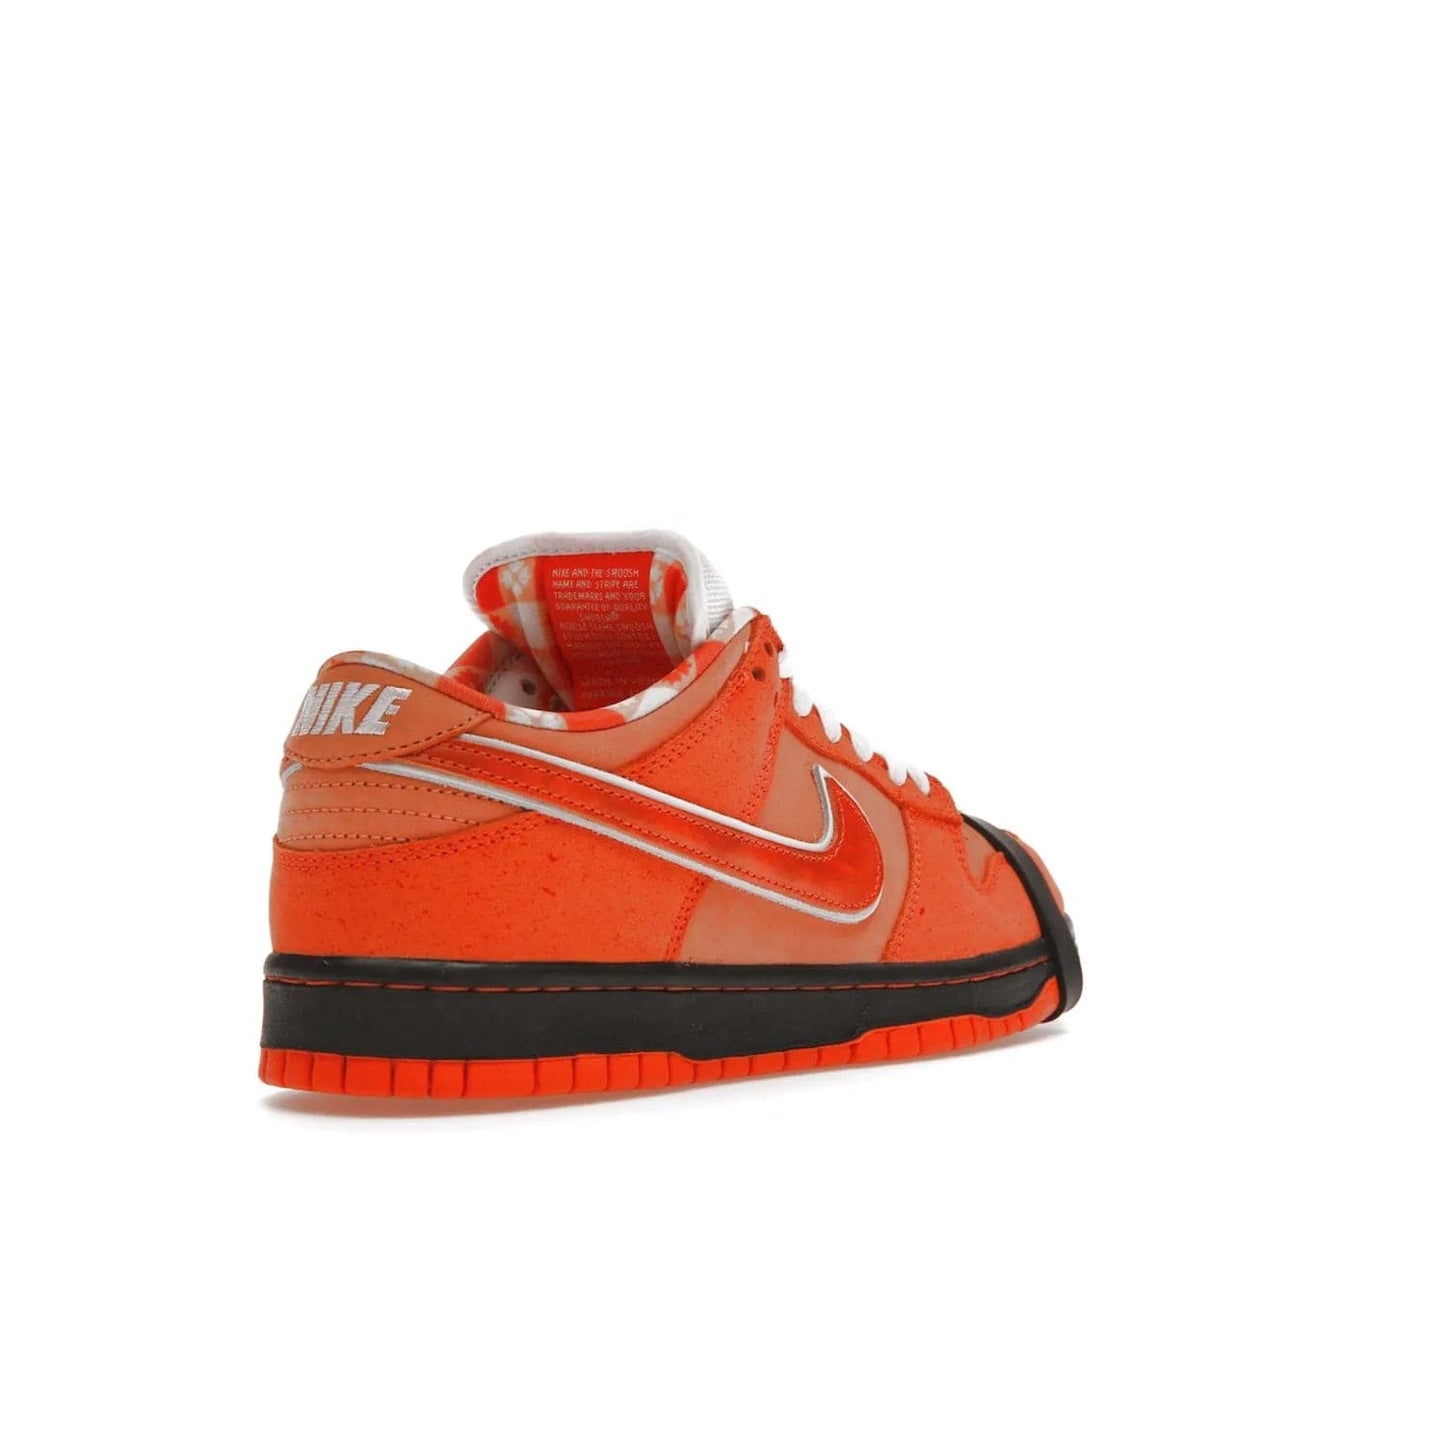 Nike SB Dunk Low Concepts Orange Lobster - Image 32 - Only at www.BallersClubKickz.com - Limited Nike SB Dunk Low Concepts Orange Lobster features premium nubuck upper with vibrant oranges for eye-catching colorblocked design. Signature Nike SB tag and bib-inspired interior for added texture. Outsole and cupsole provide extra reinforcement. Get it 12/20/2022.